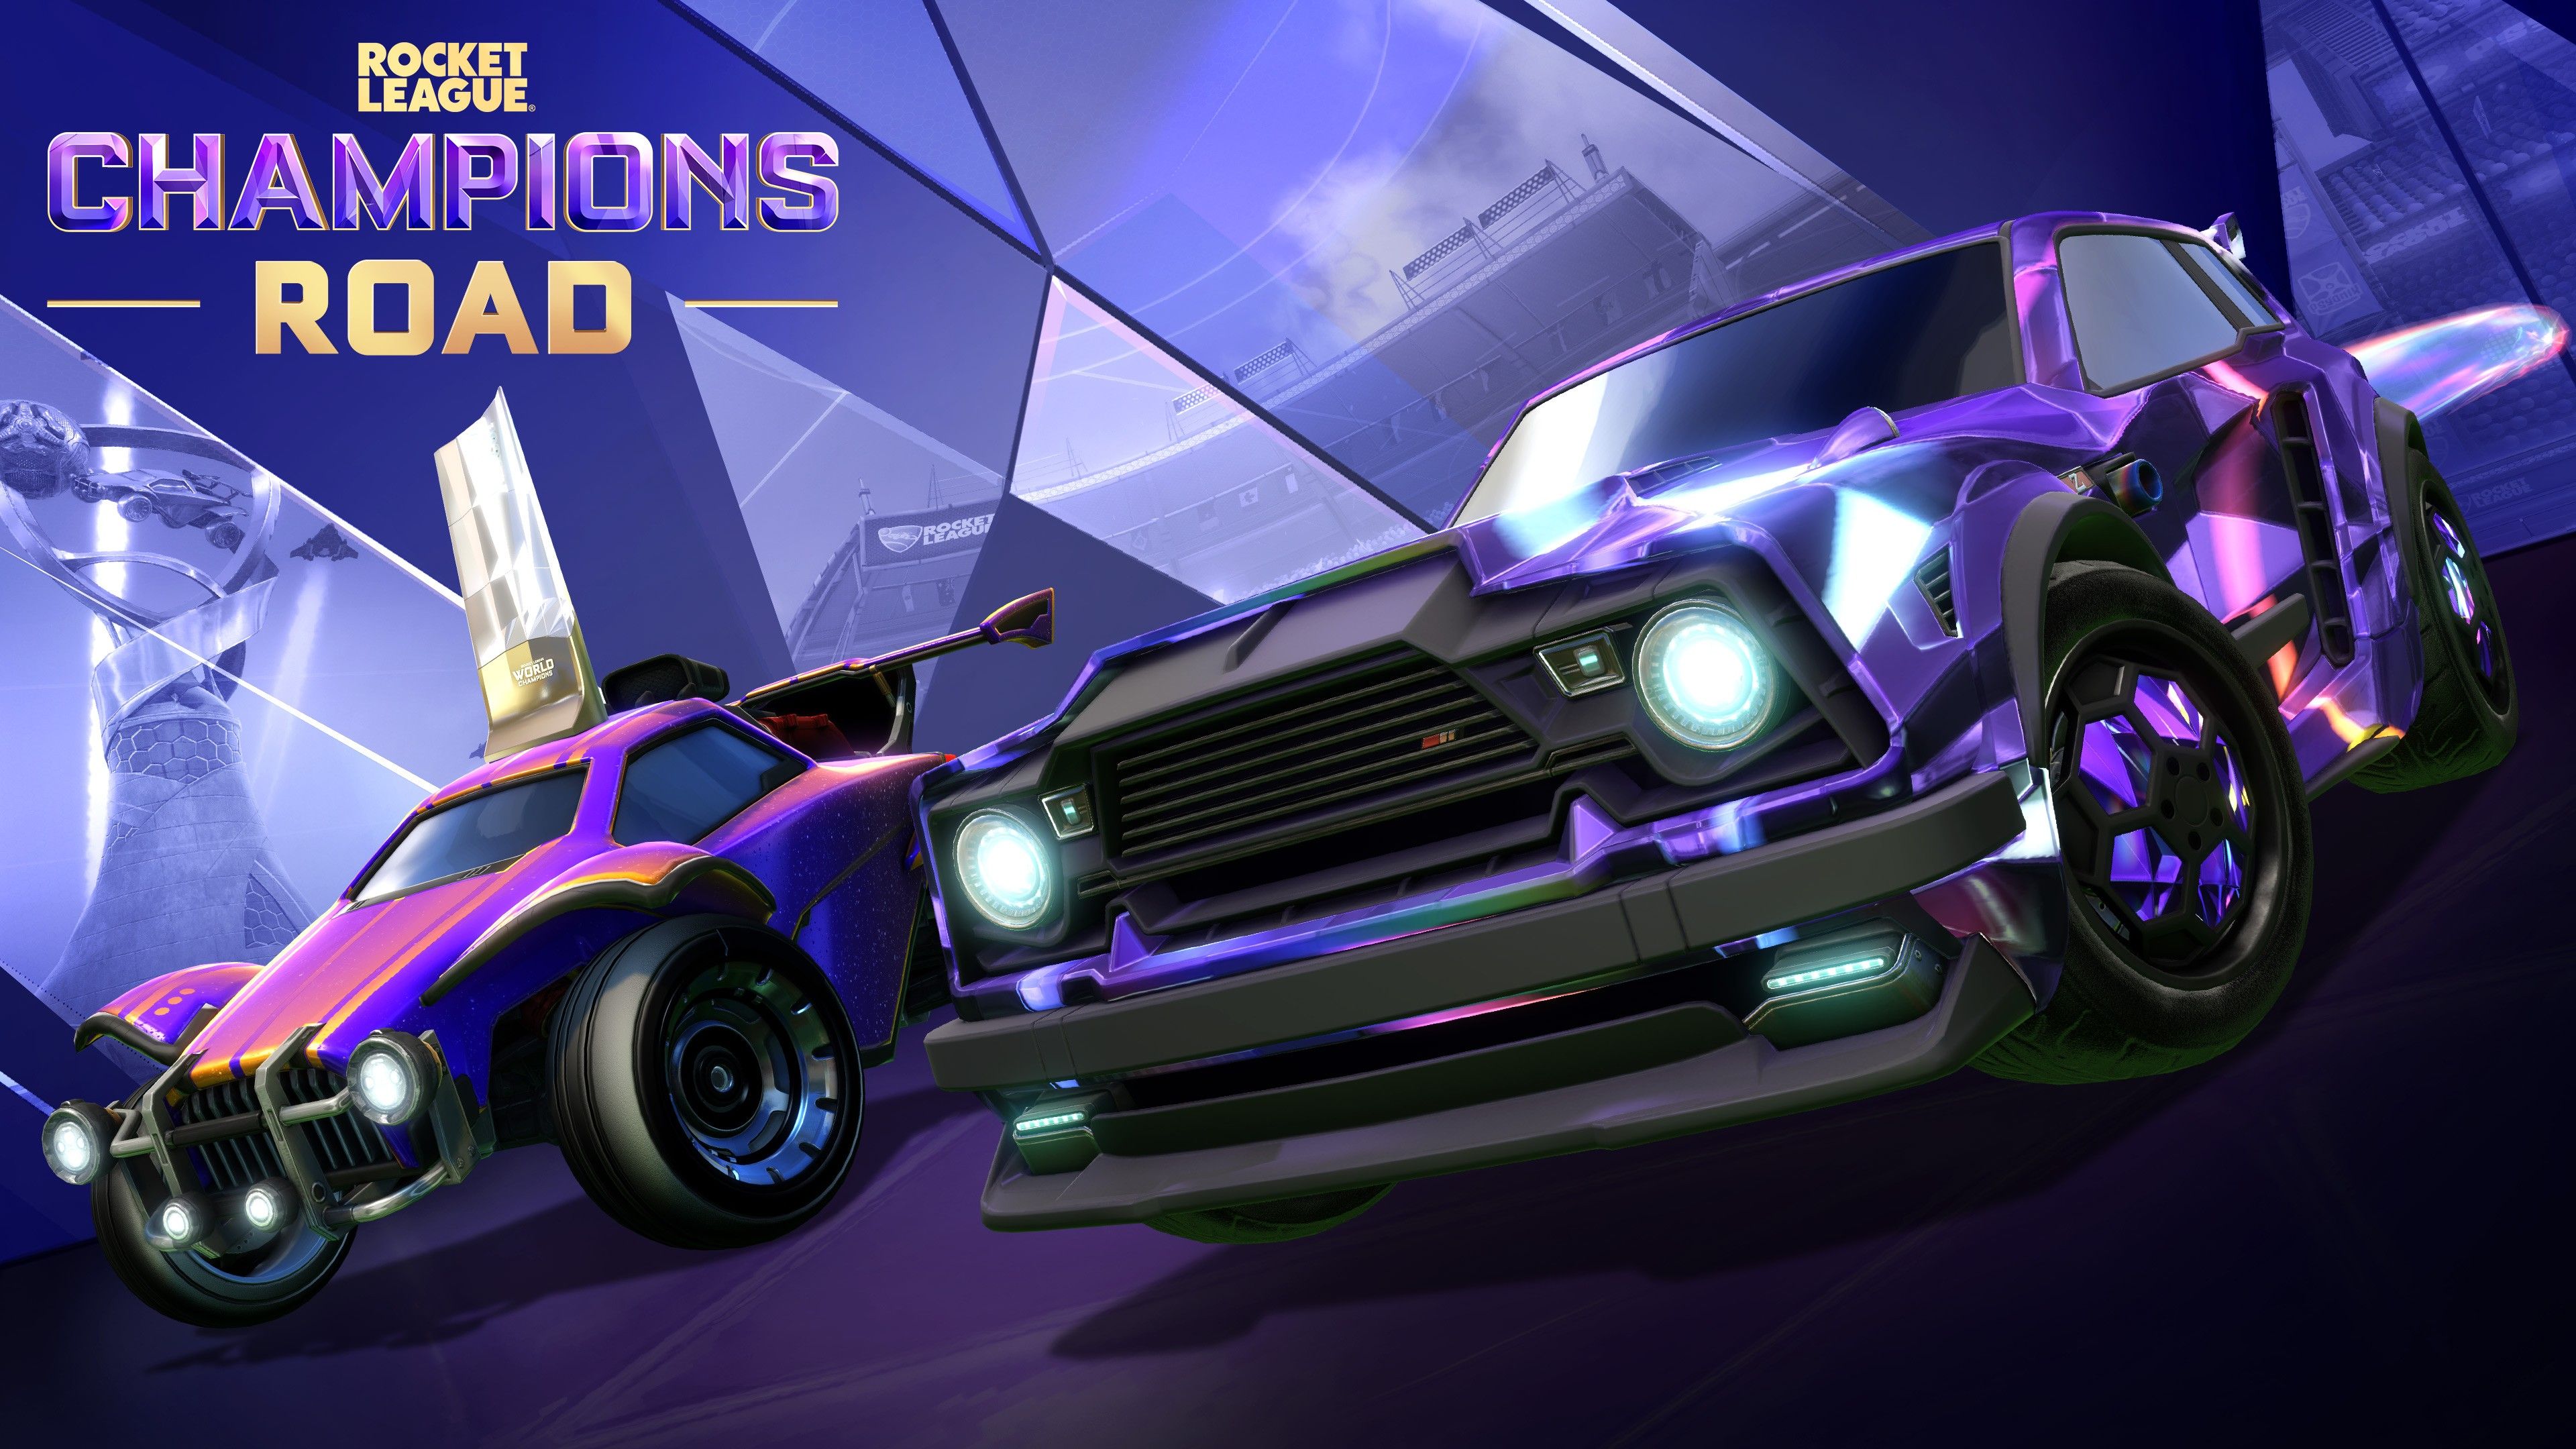 Seize the Crown With Champions Road Rocket League®